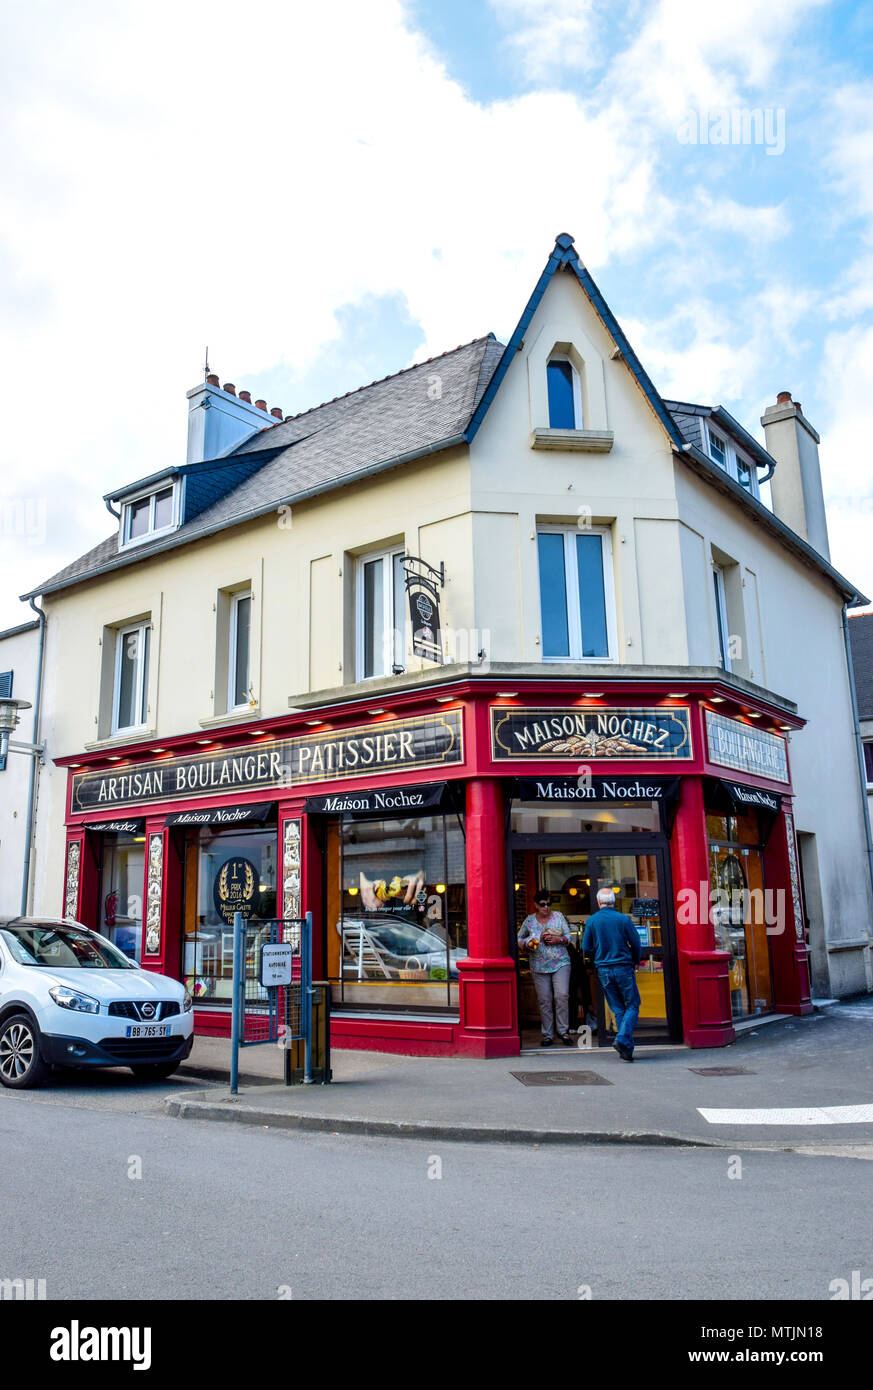 The boulanger and patissier in Carantec, Brittany, France sells their bread and pastries from a bright-coloured corner shop. Stock Photo